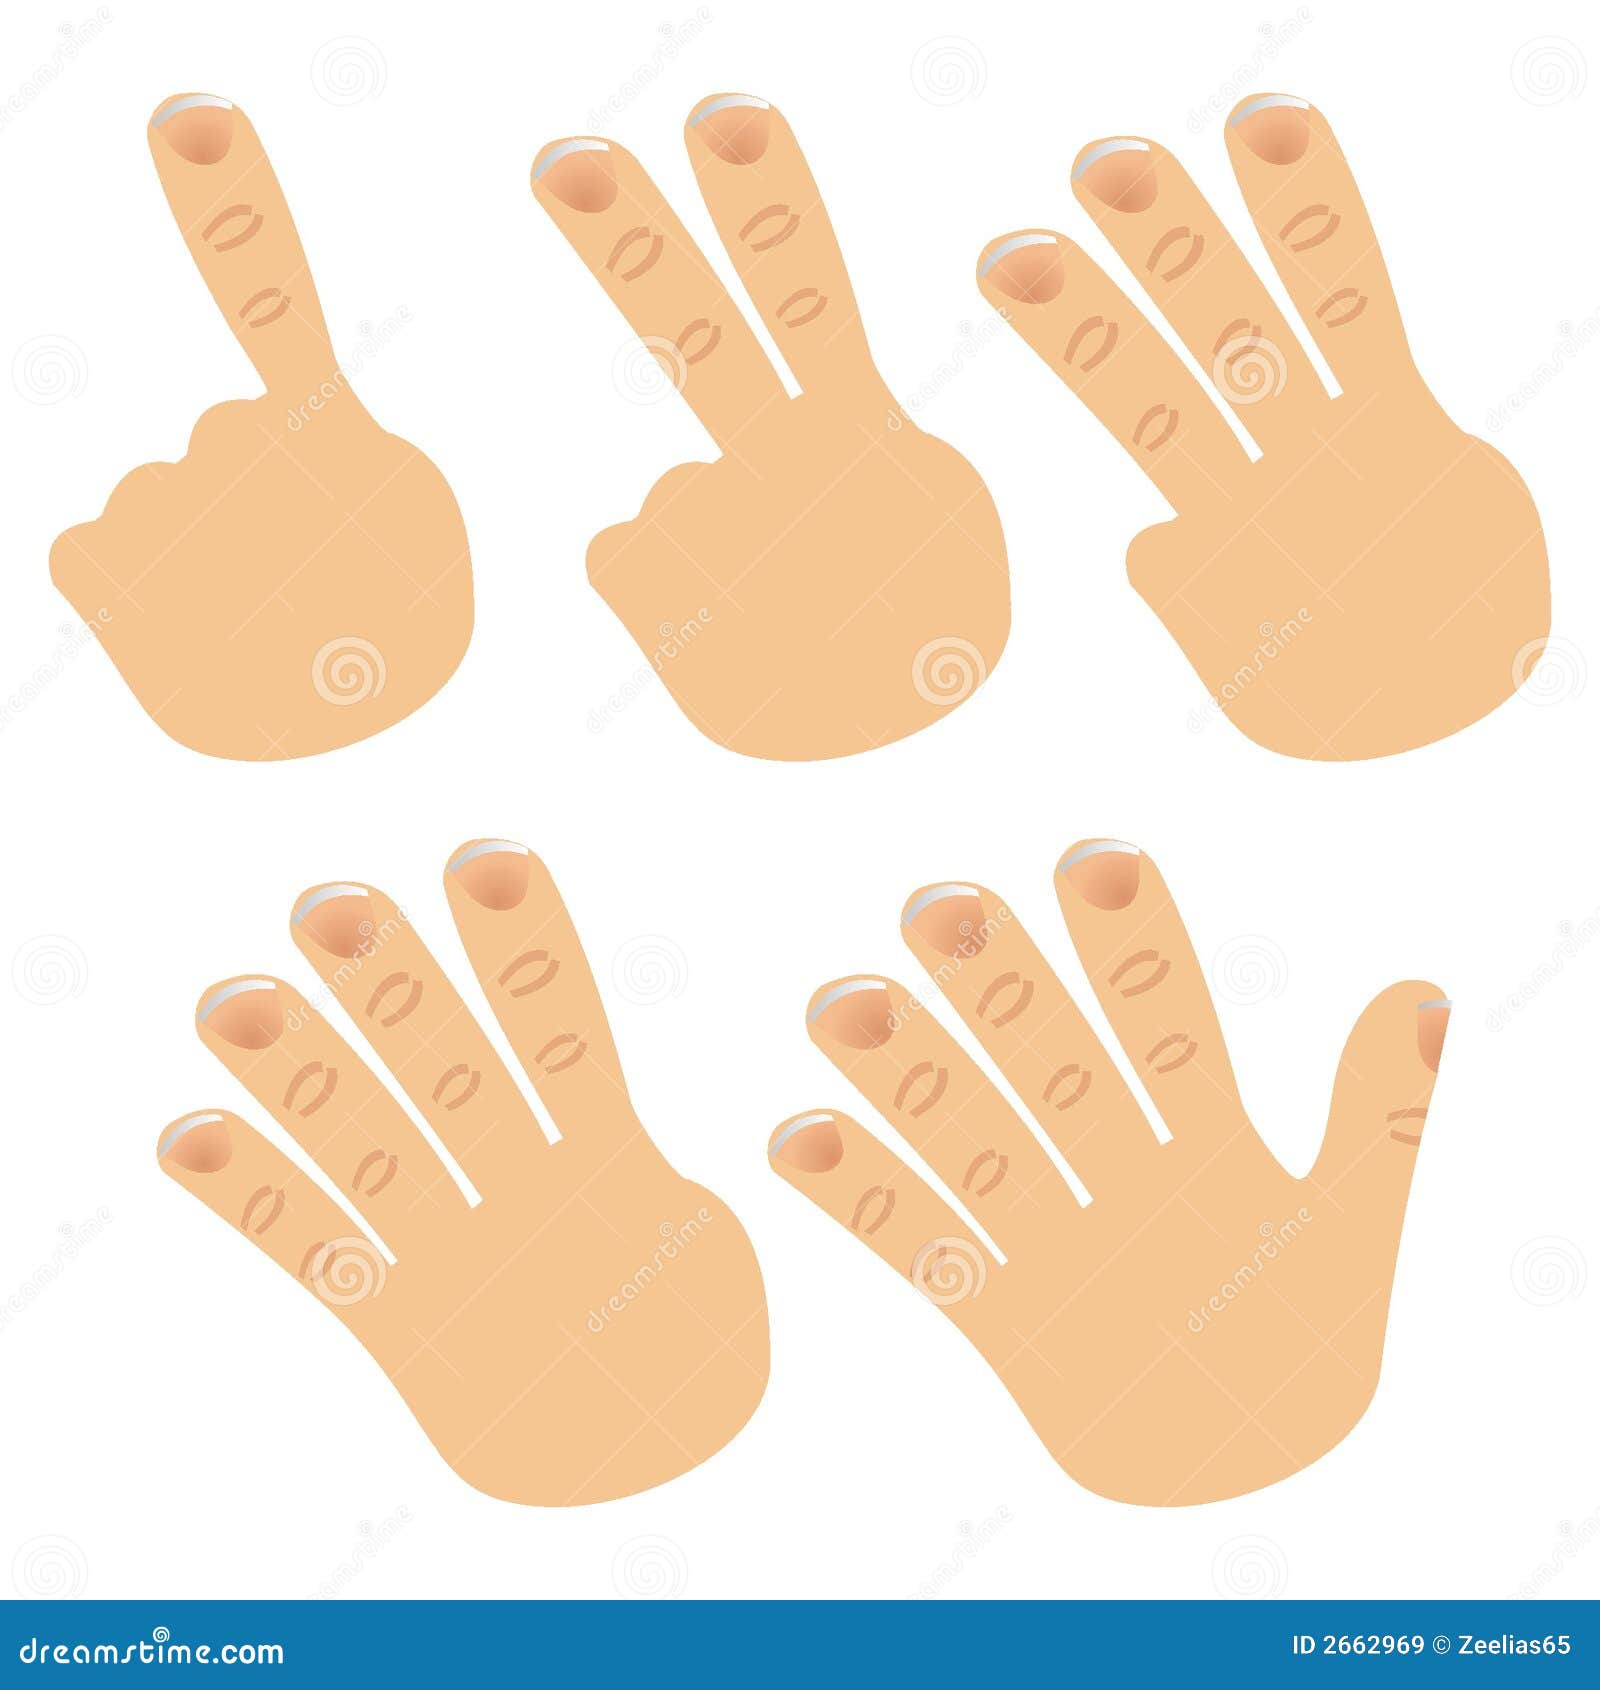 numbers with fingers